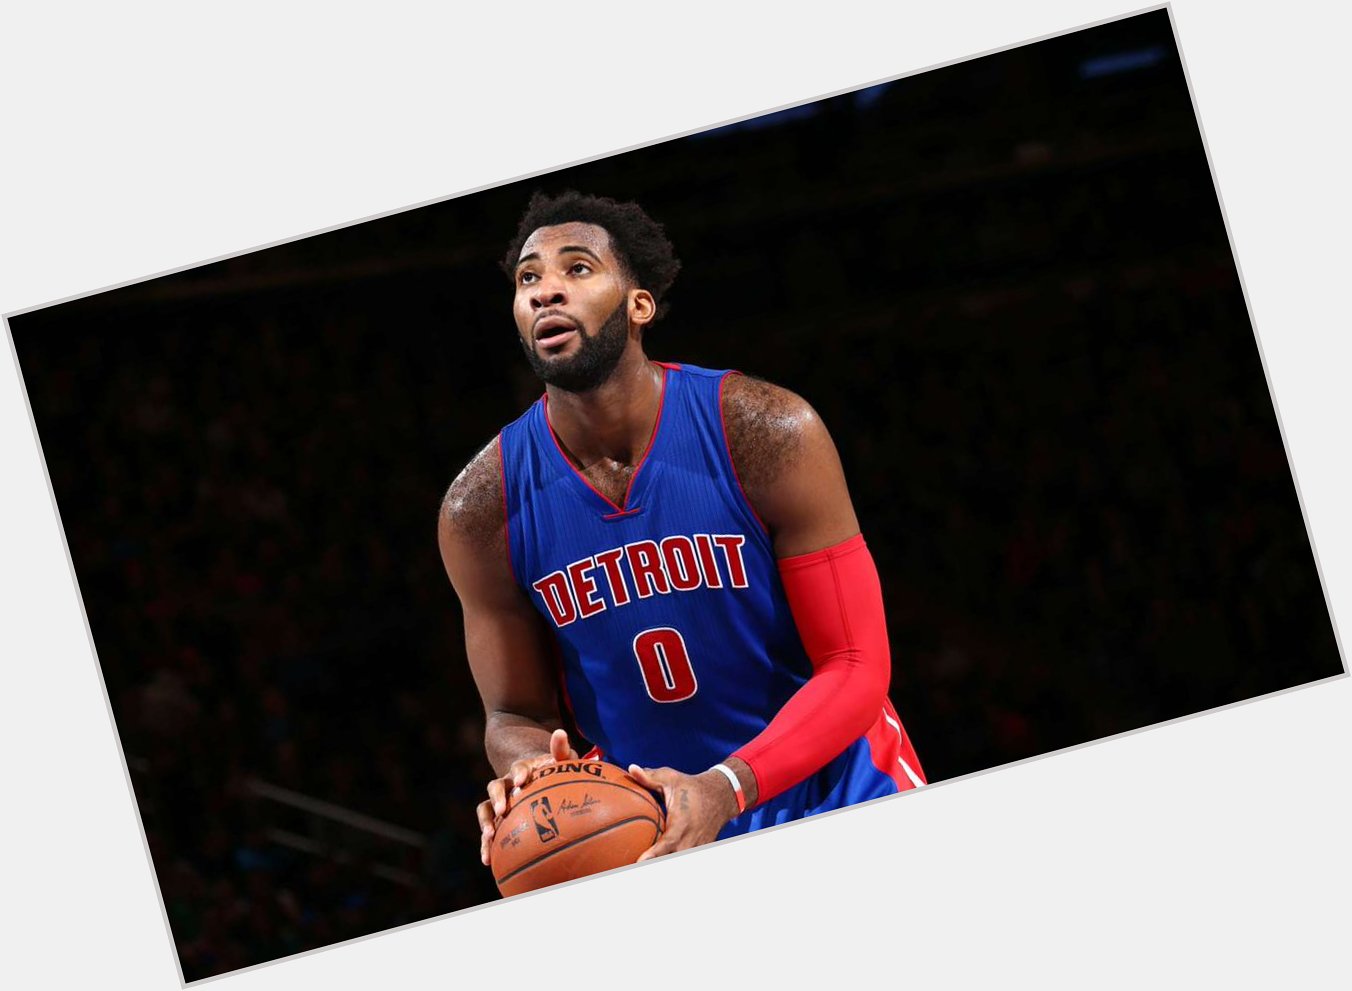 Happy Birthday to Andre Drummond who turns 24 today! 